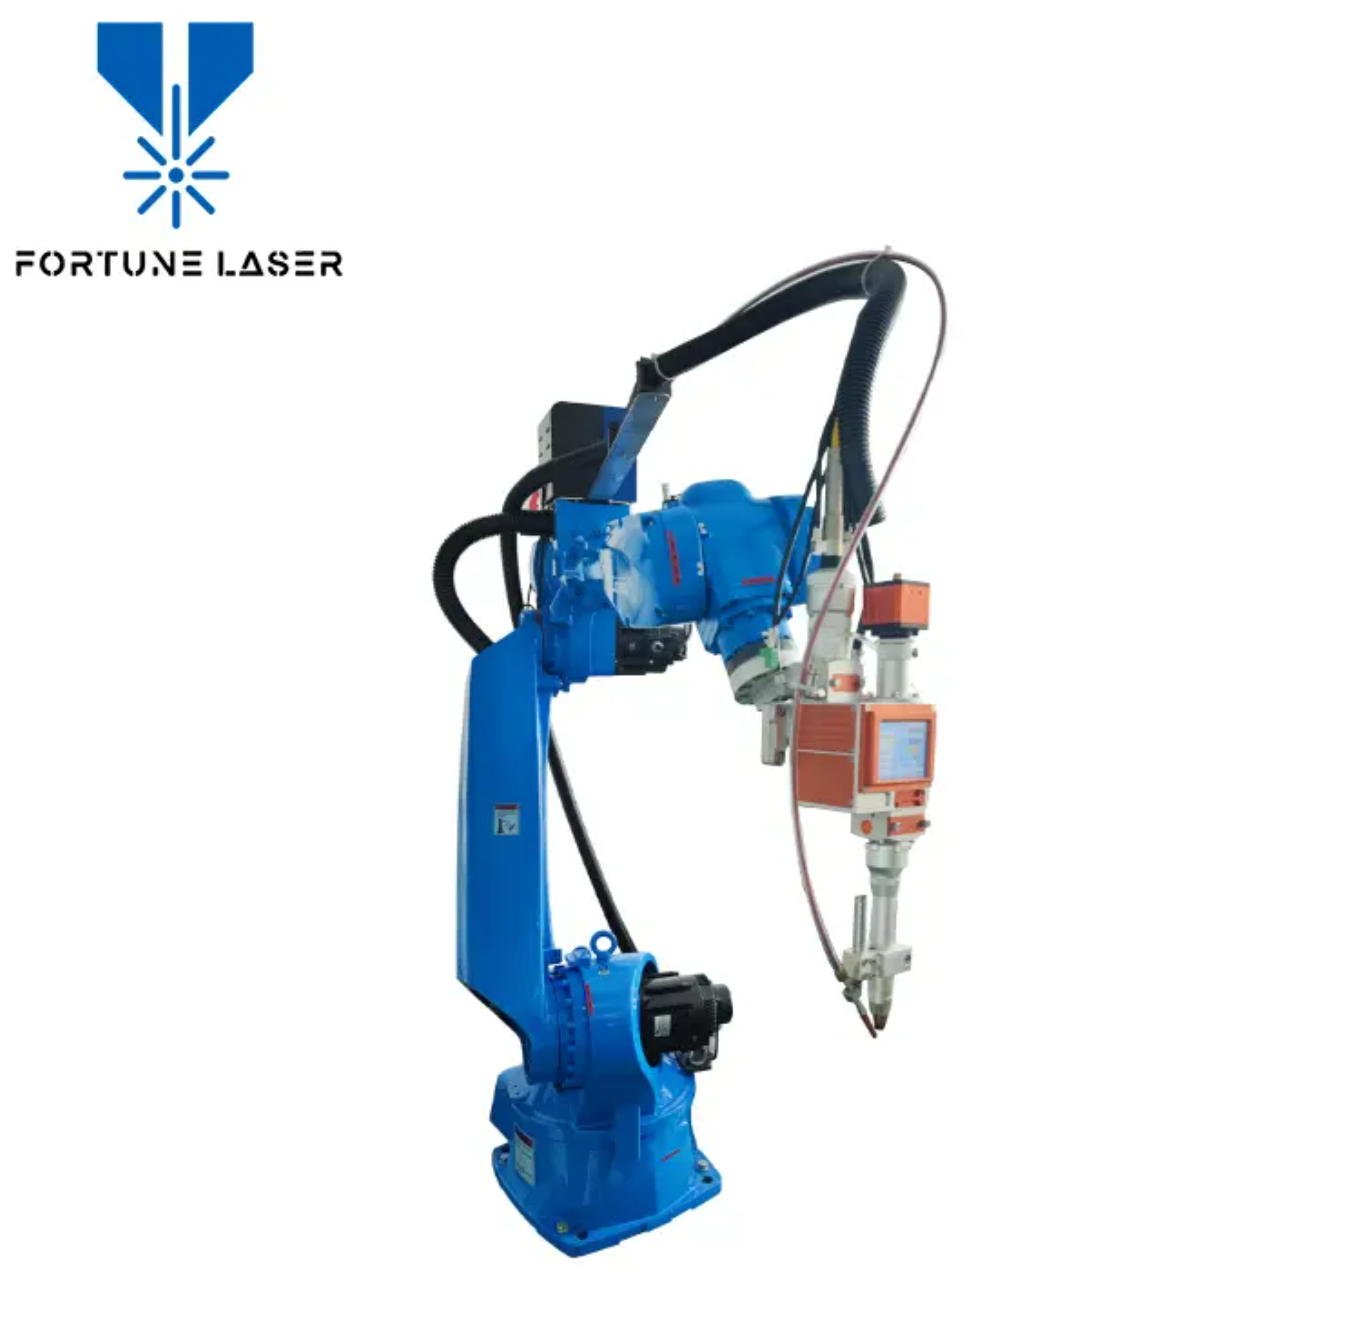 Application fields of laser welding robots: promoting automation in various industries